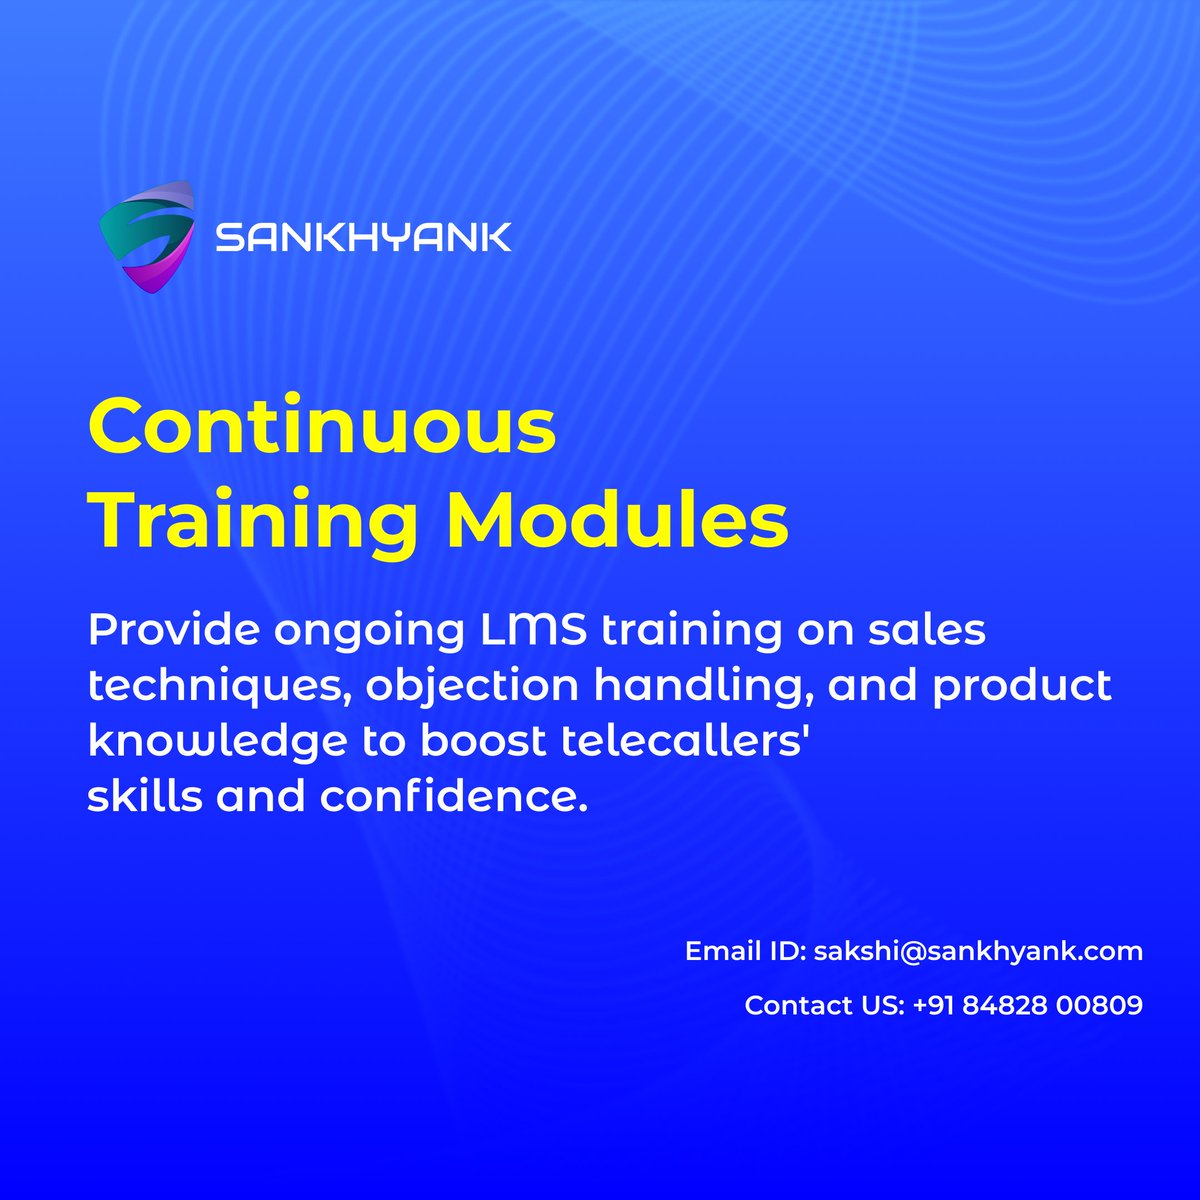 💼 Keep telecallers sharp 📚🎓 with continuous LMS training! 📞 Elevate sales techniques, 👩‍💼 objection handling, 🚀 and product 📋 knowledge to boost 💡 skills and confidence. 🔥 @Sankhyank__
#ContinuousTraining #TelecallerSkills #SalesTraining #ProductKnowledge #LMSLearning